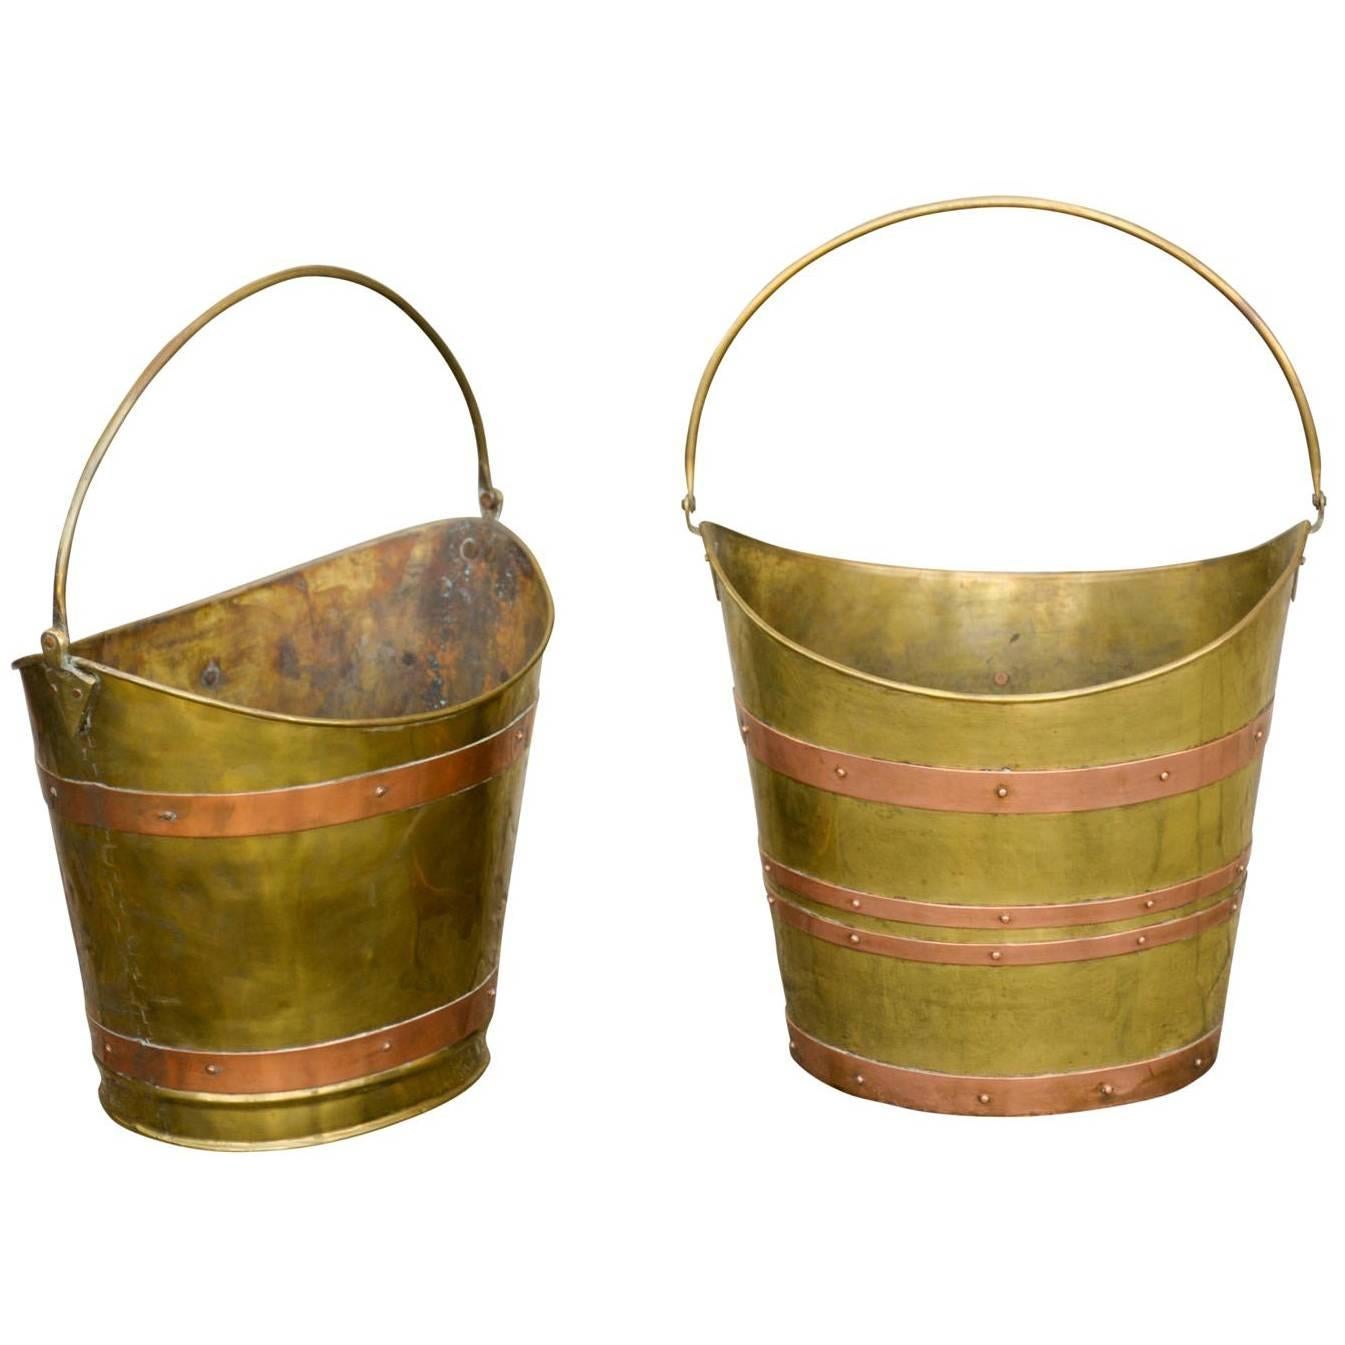 English Wide Mouth Brass Bucket with Copper Straps from the Early 20th Century For Sale